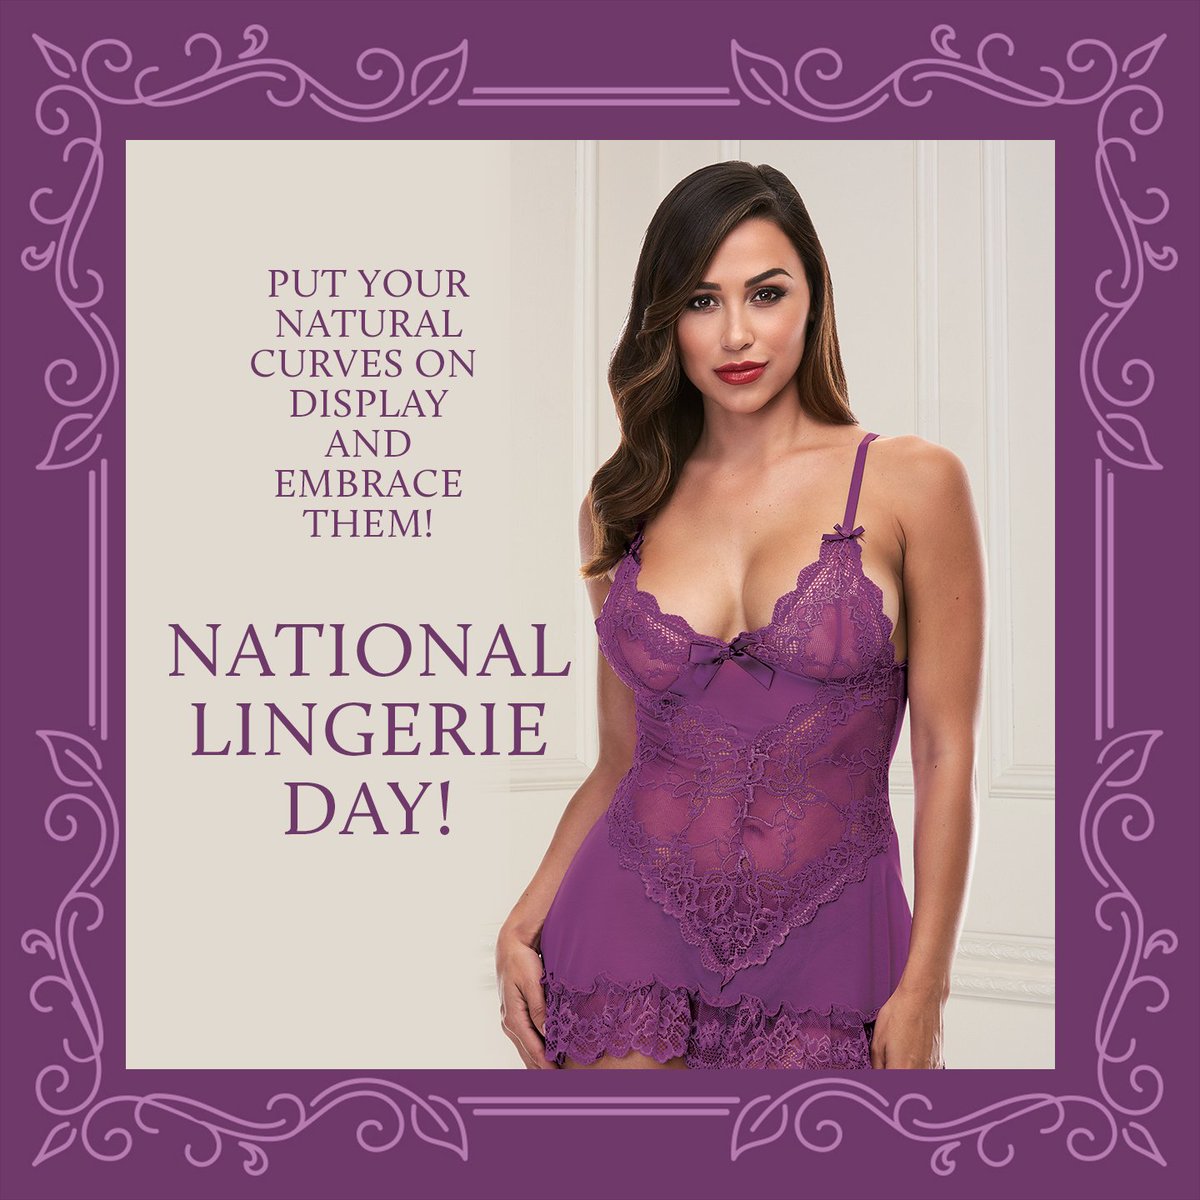 Baci Lingerie on X: Happy National Lingerie Day! Celebrate this sexy  holiday by purchasing and slaying any Baci set. Visit the link in our bio  to see what we have in store